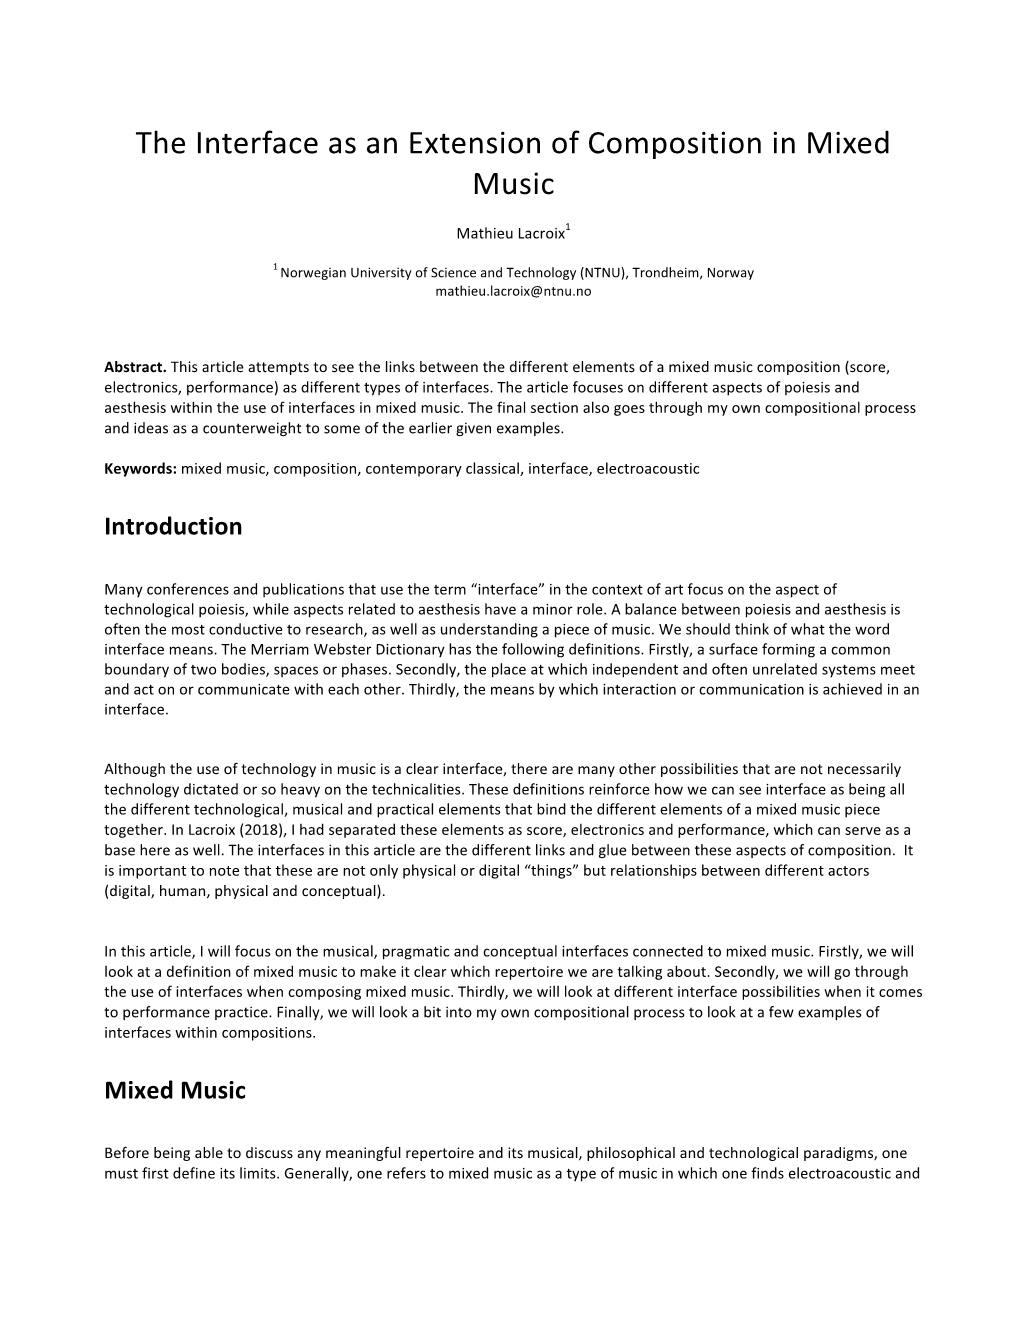 The Interface As an Extension of Composition in Mixed Music